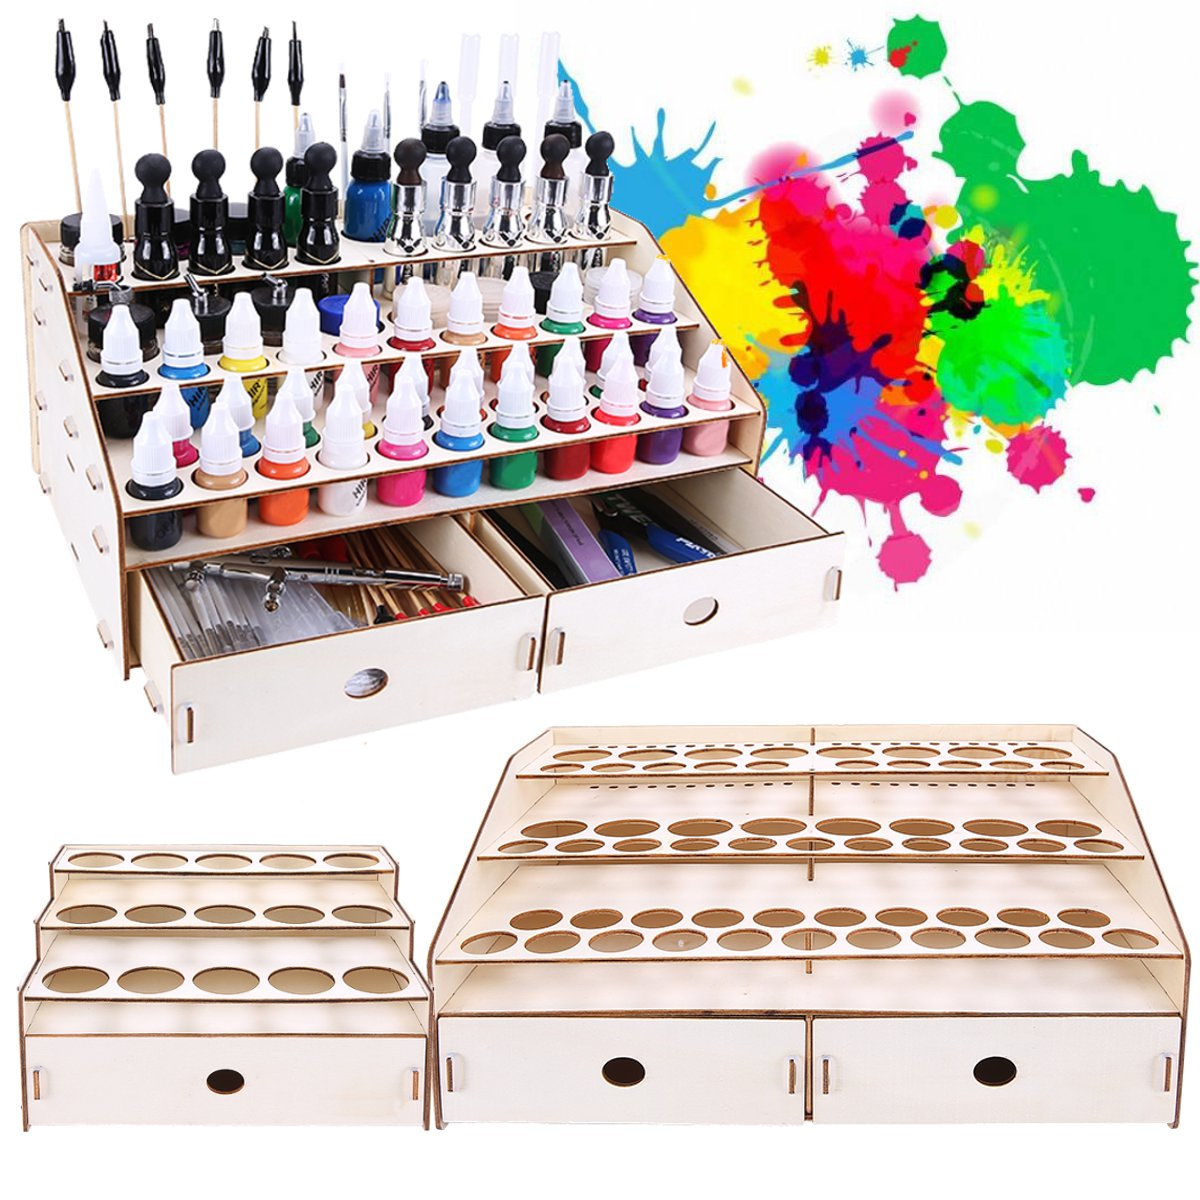 The Best Miniature Paint Rack Solutions We Have Found